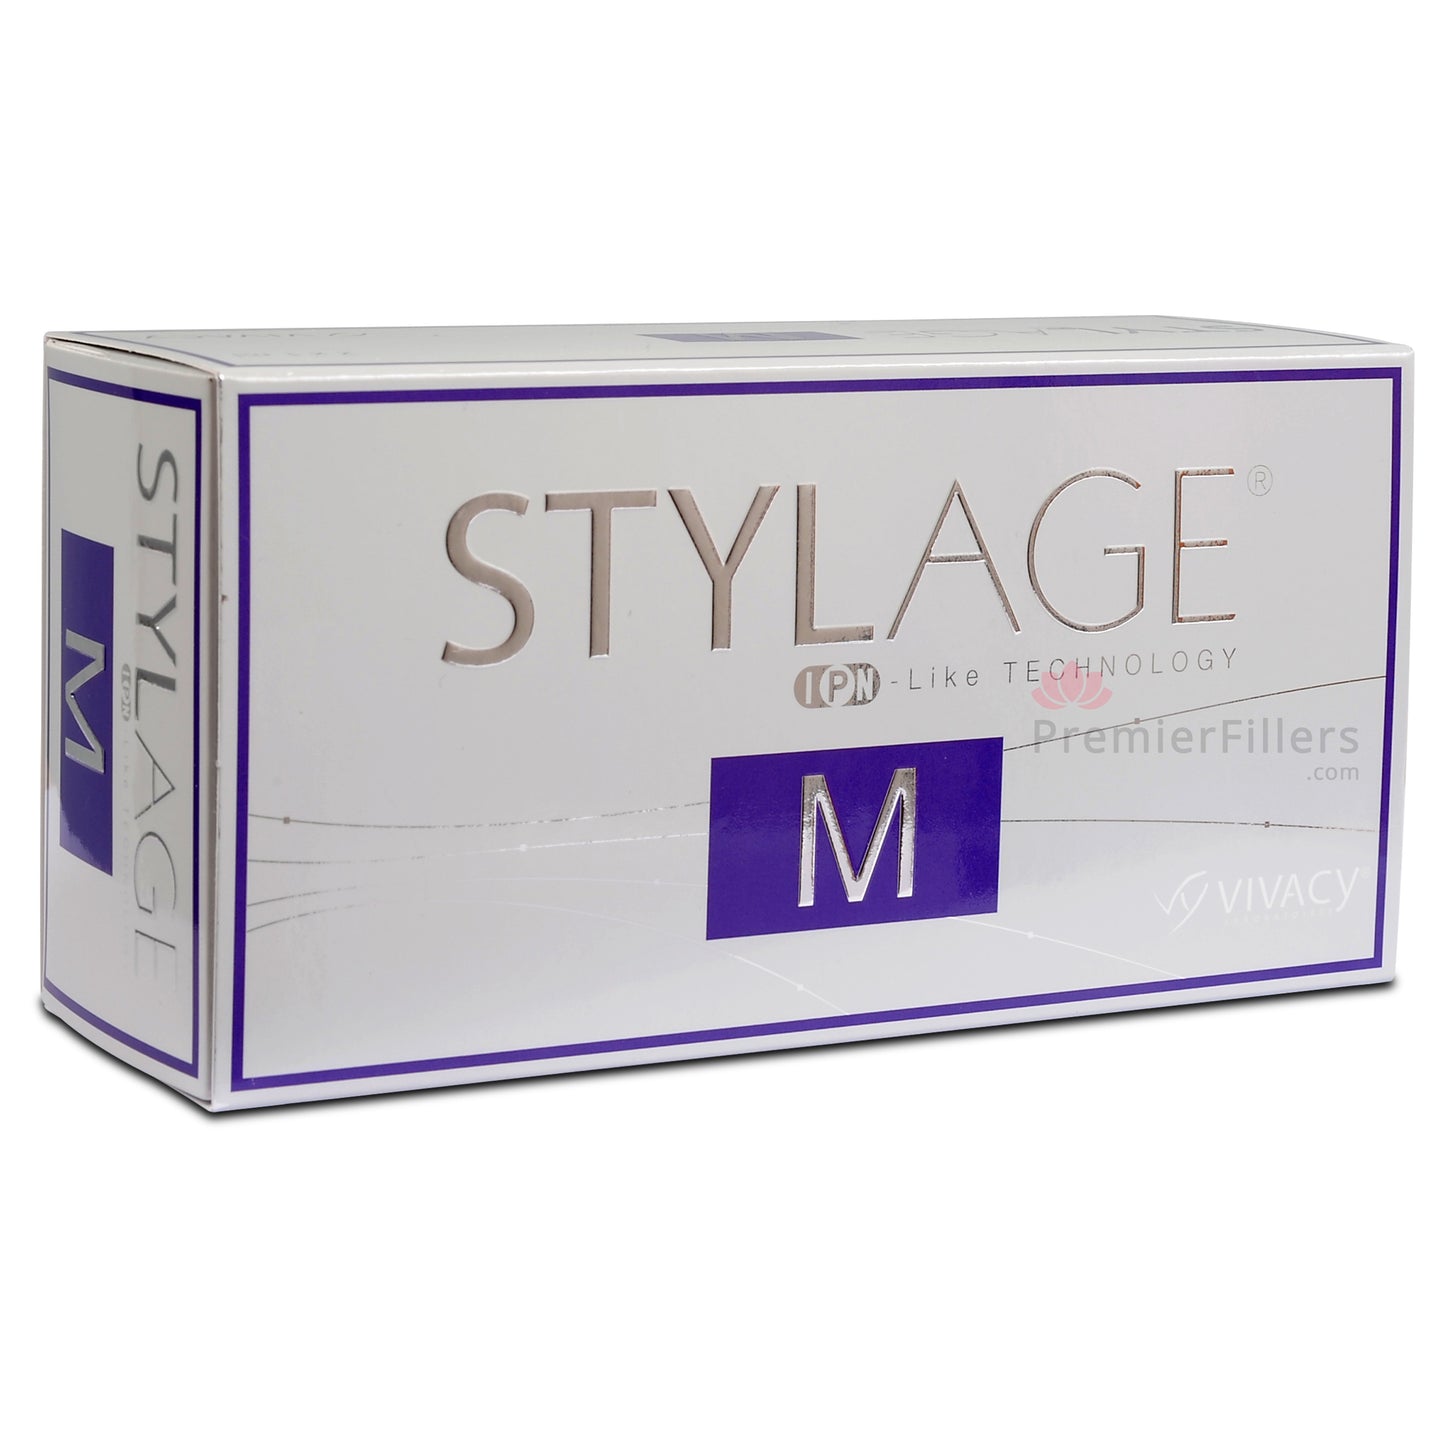 Vivacy Stylage M (2x1ml)